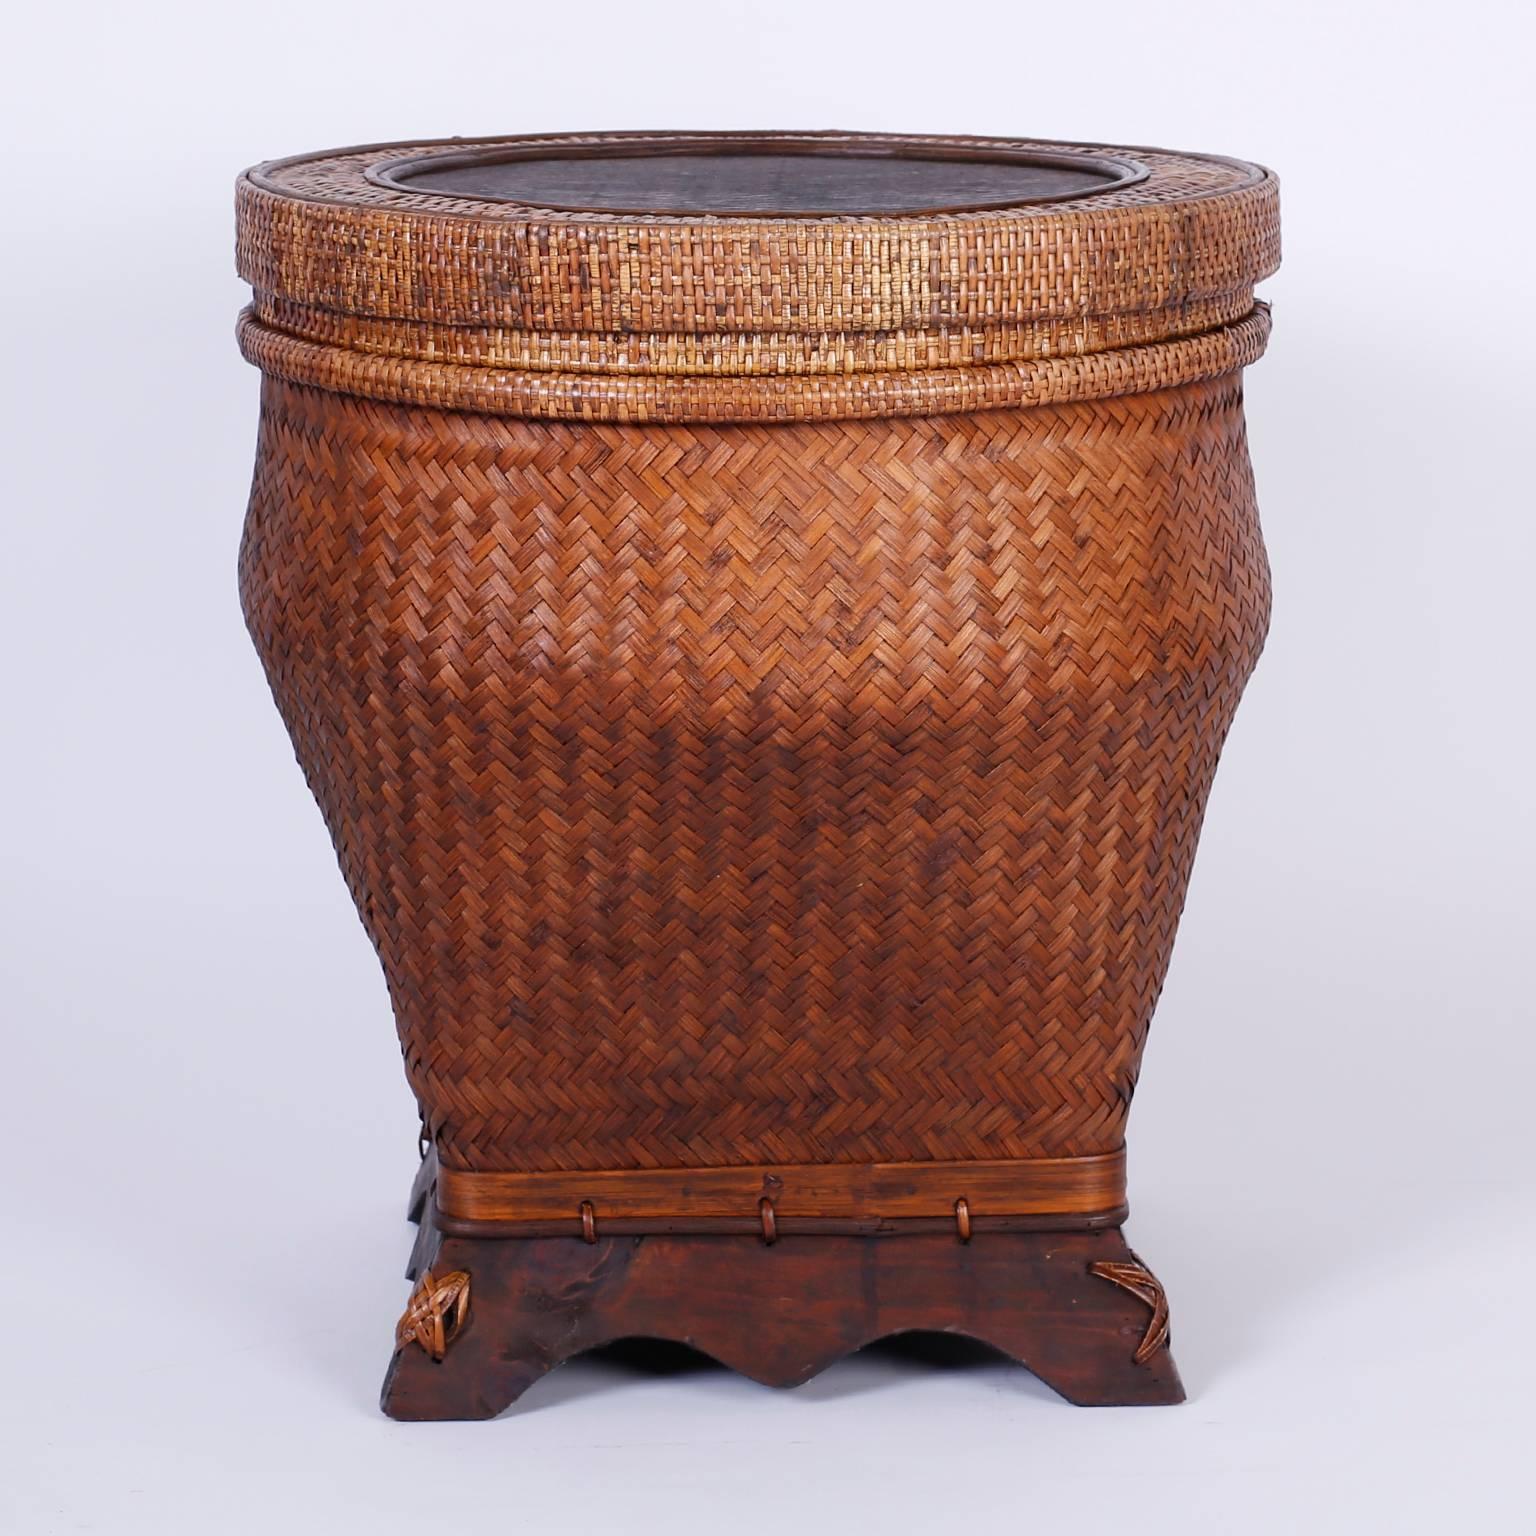 Dynamic pair of vintage lidded rattan baskets that can be utilized as end tables or nightstands. Crafted with intricately woven reed having removable lids, Bombay form and carved hardwood bases.